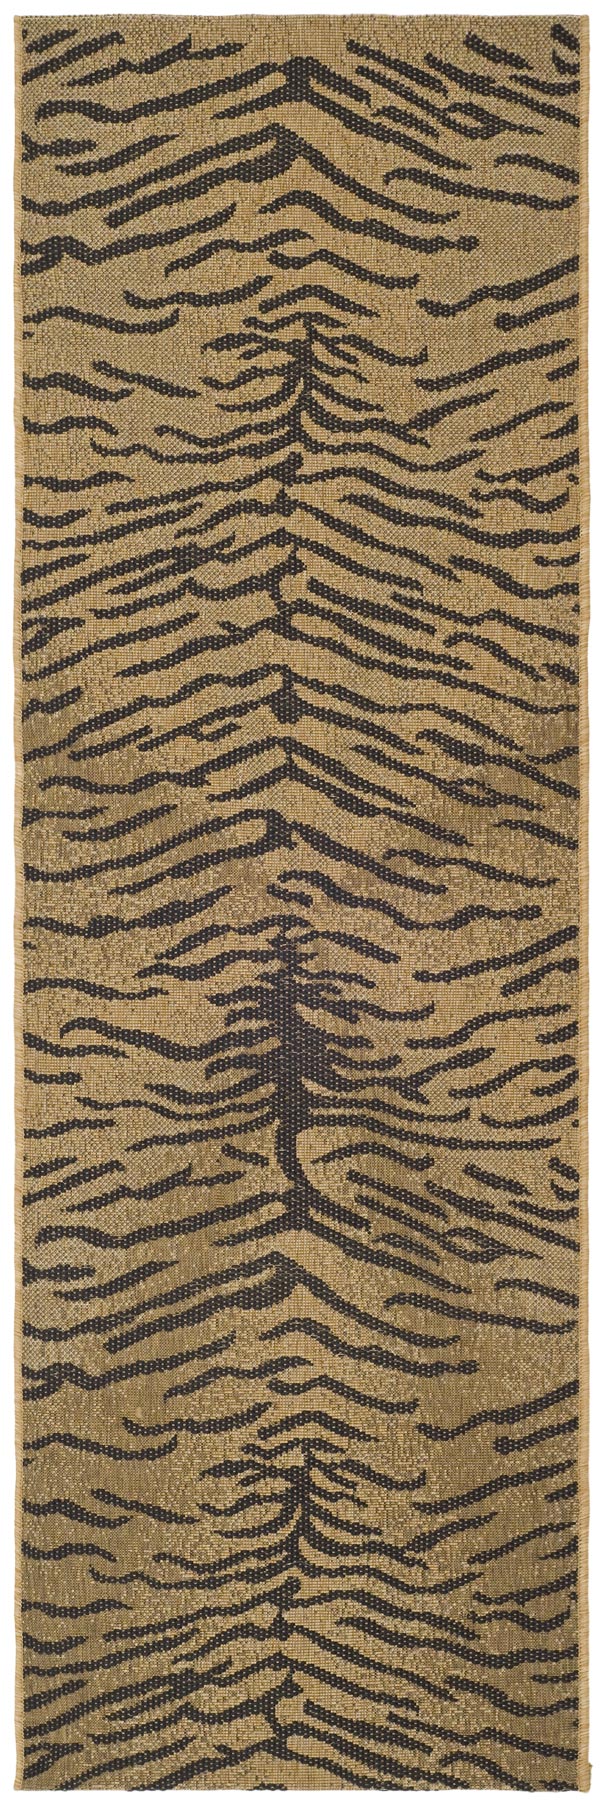 Safavieh Courtyard Power Loomed Latex Backing Rugs In Gold / Natural